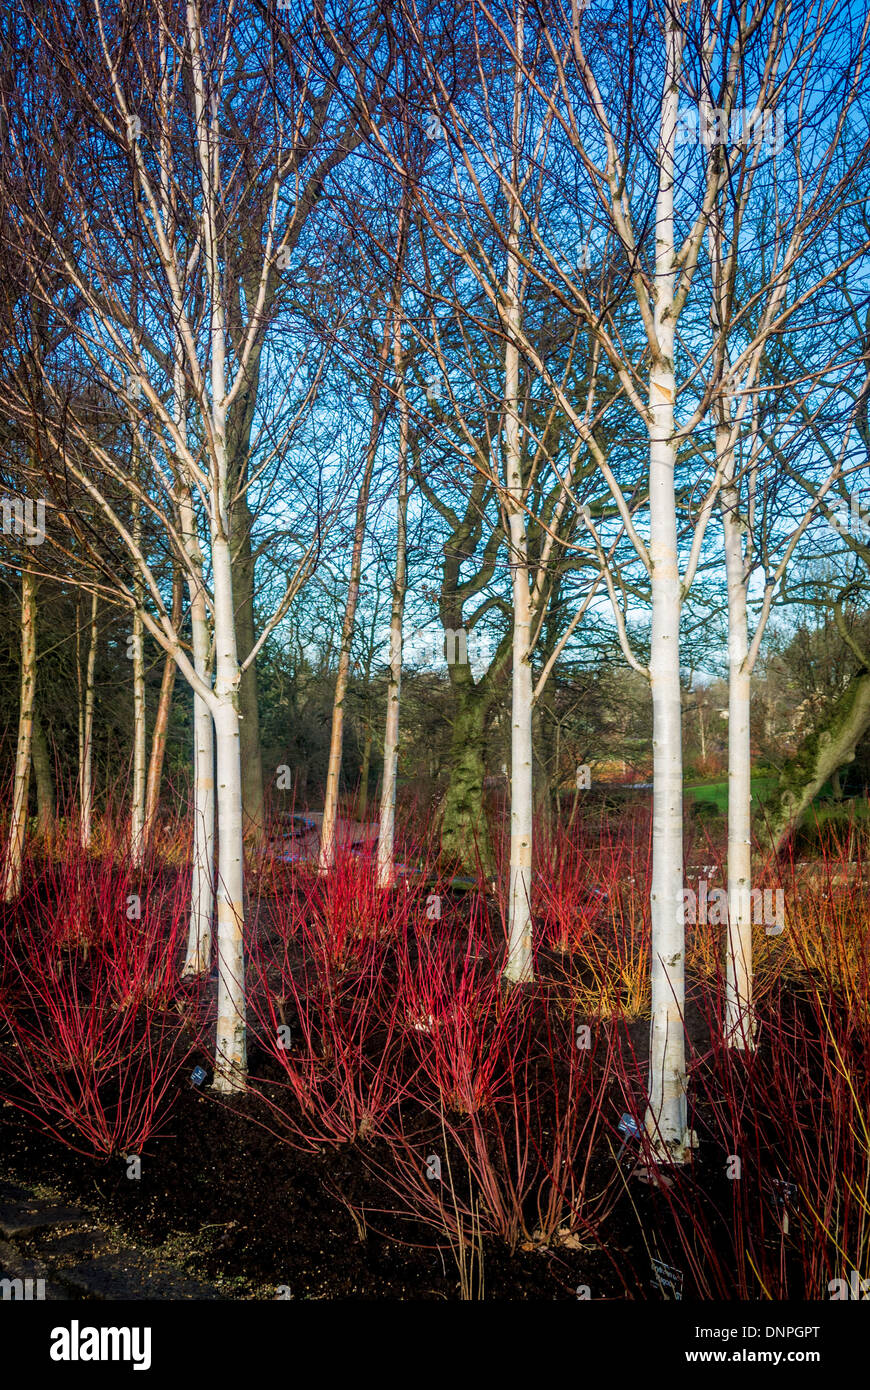 Young silver birch trees in winter with bright white trunks, under planted with red stemmed Dogwood shrubs. Stock Photo